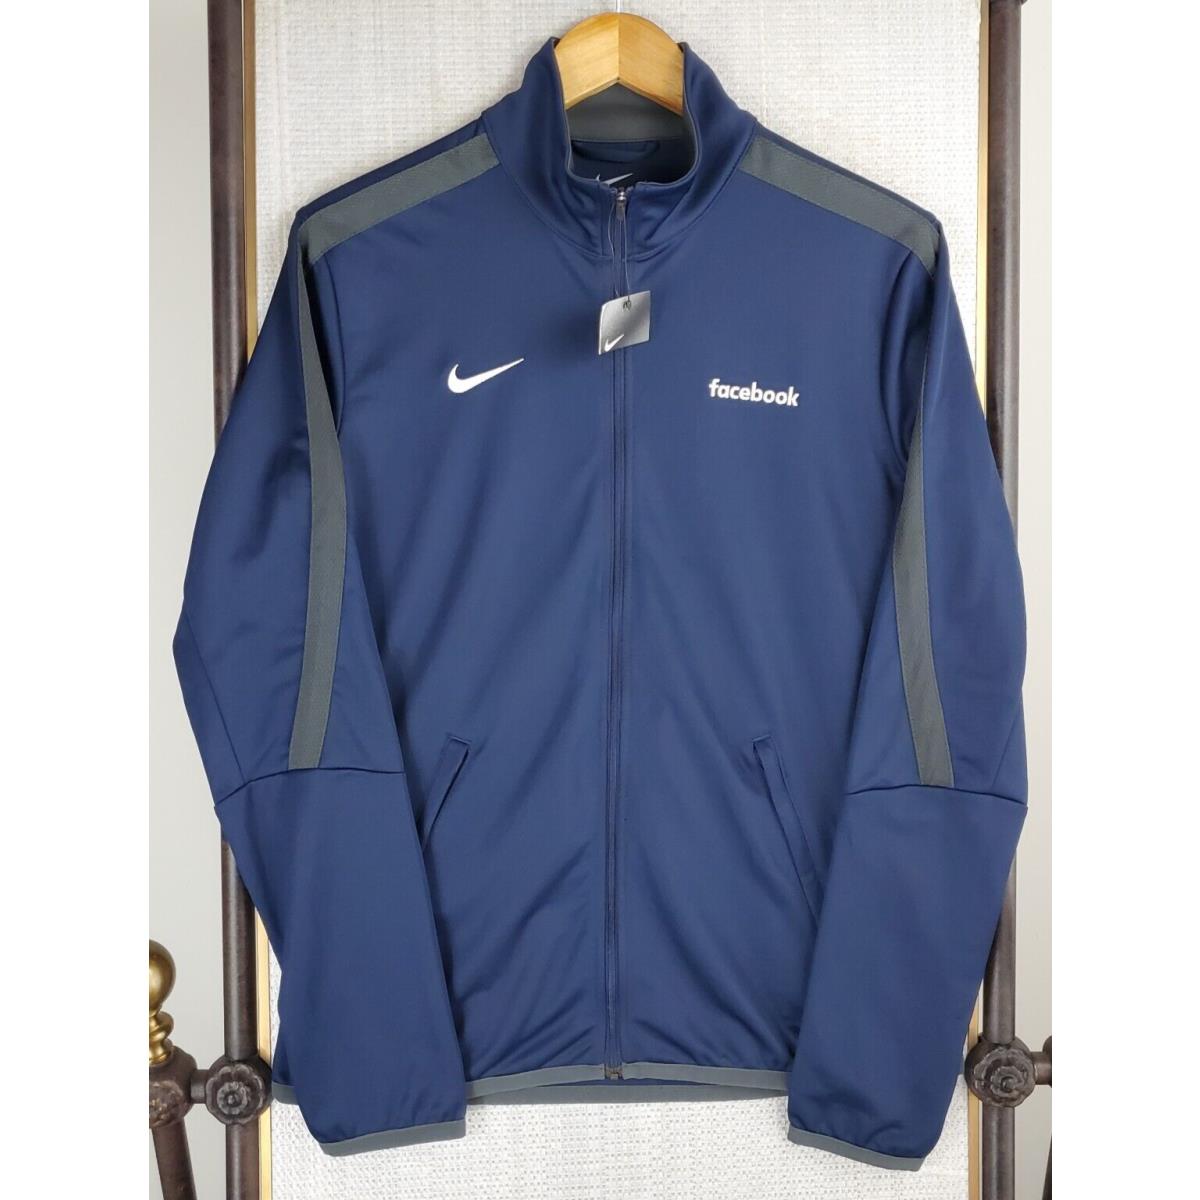 Nike x Facebook Womens Size Small Full Zip Performance Jacket Blue